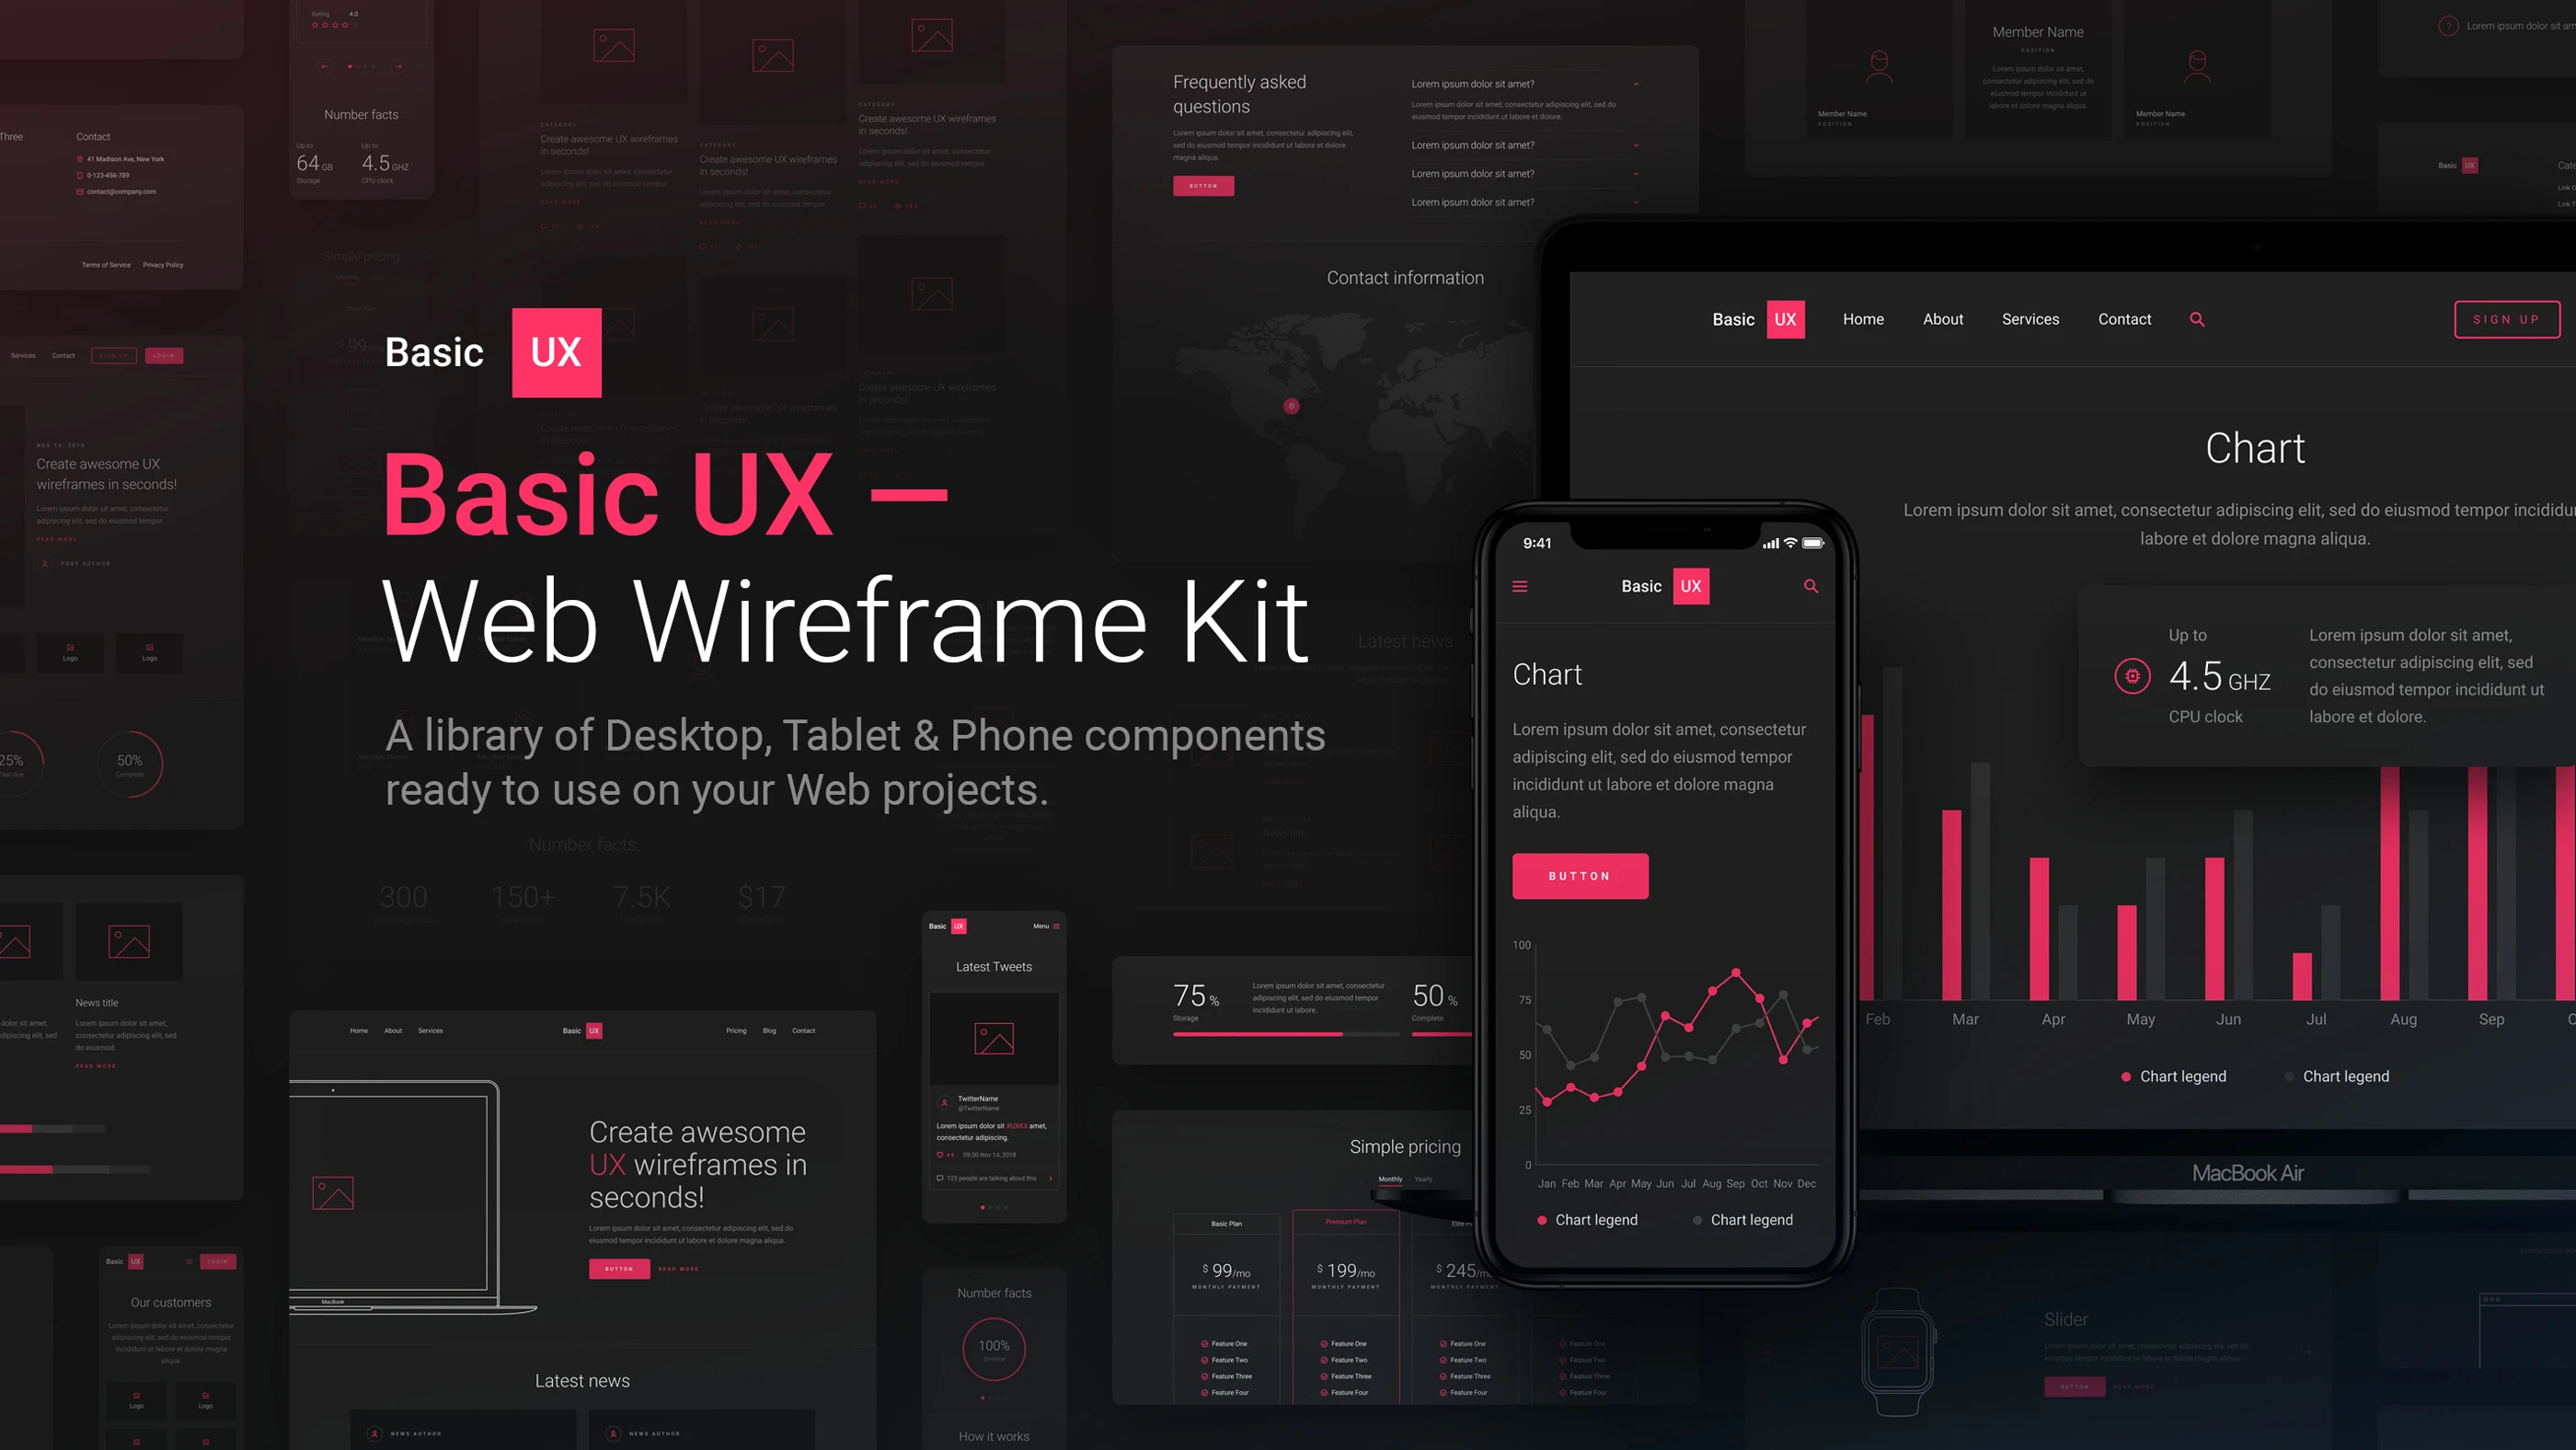 Basic UX for Invision Studio - The final deliverable was a family of 4 products that you can download and use for free. Just download InVision Studio, open their App Store and search for 128 Outline Icons, eCommerce Wireframe Kit, User Interface Kit and Web Wireframe Kit.